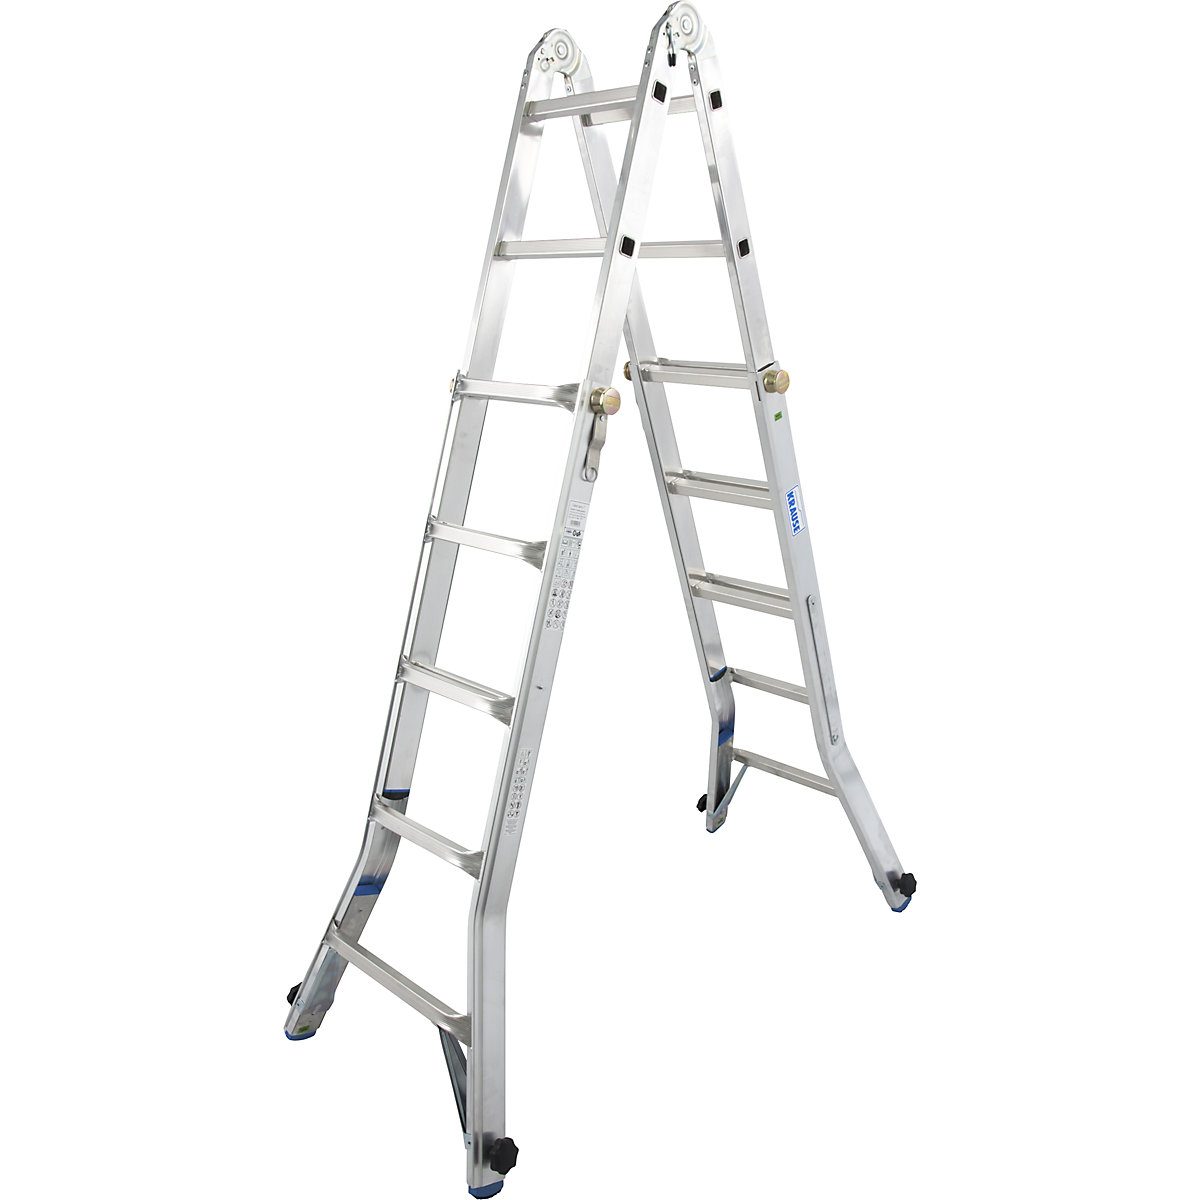 Hinged telescopic ladder – KRAUSE, can be used as a step ladder or lean to ladder, 4 x 5 rungs-6